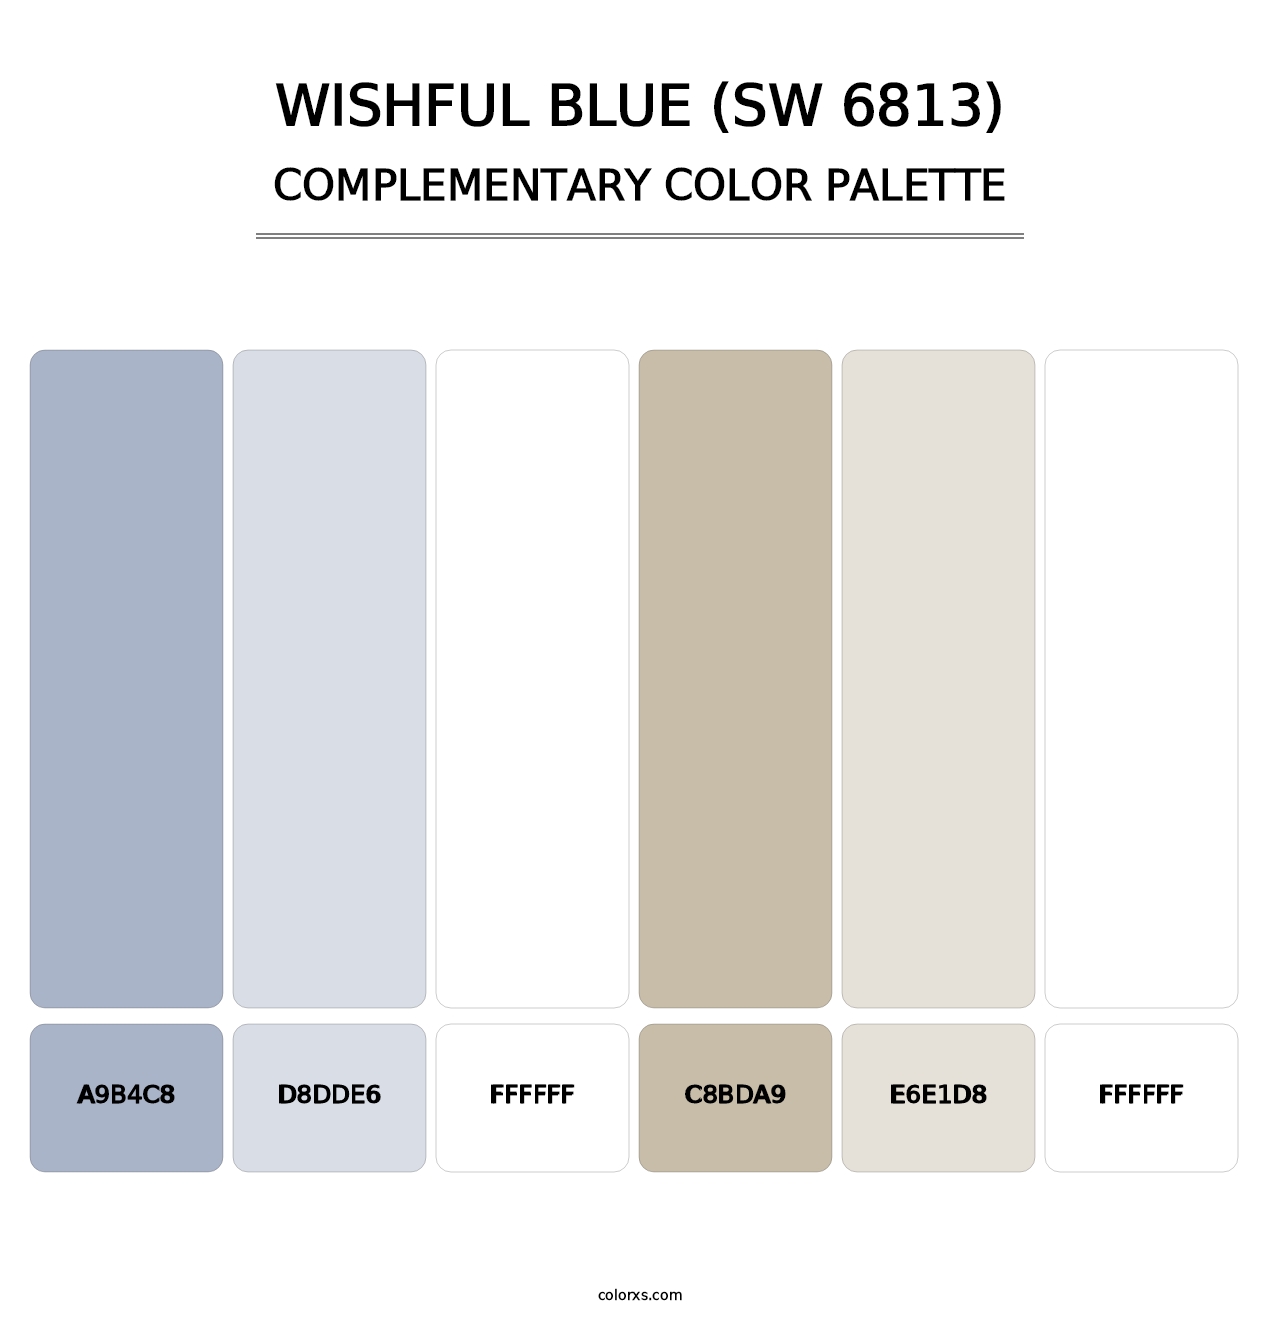 Wishful Blue (SW 6813) - Complementary Color Palette